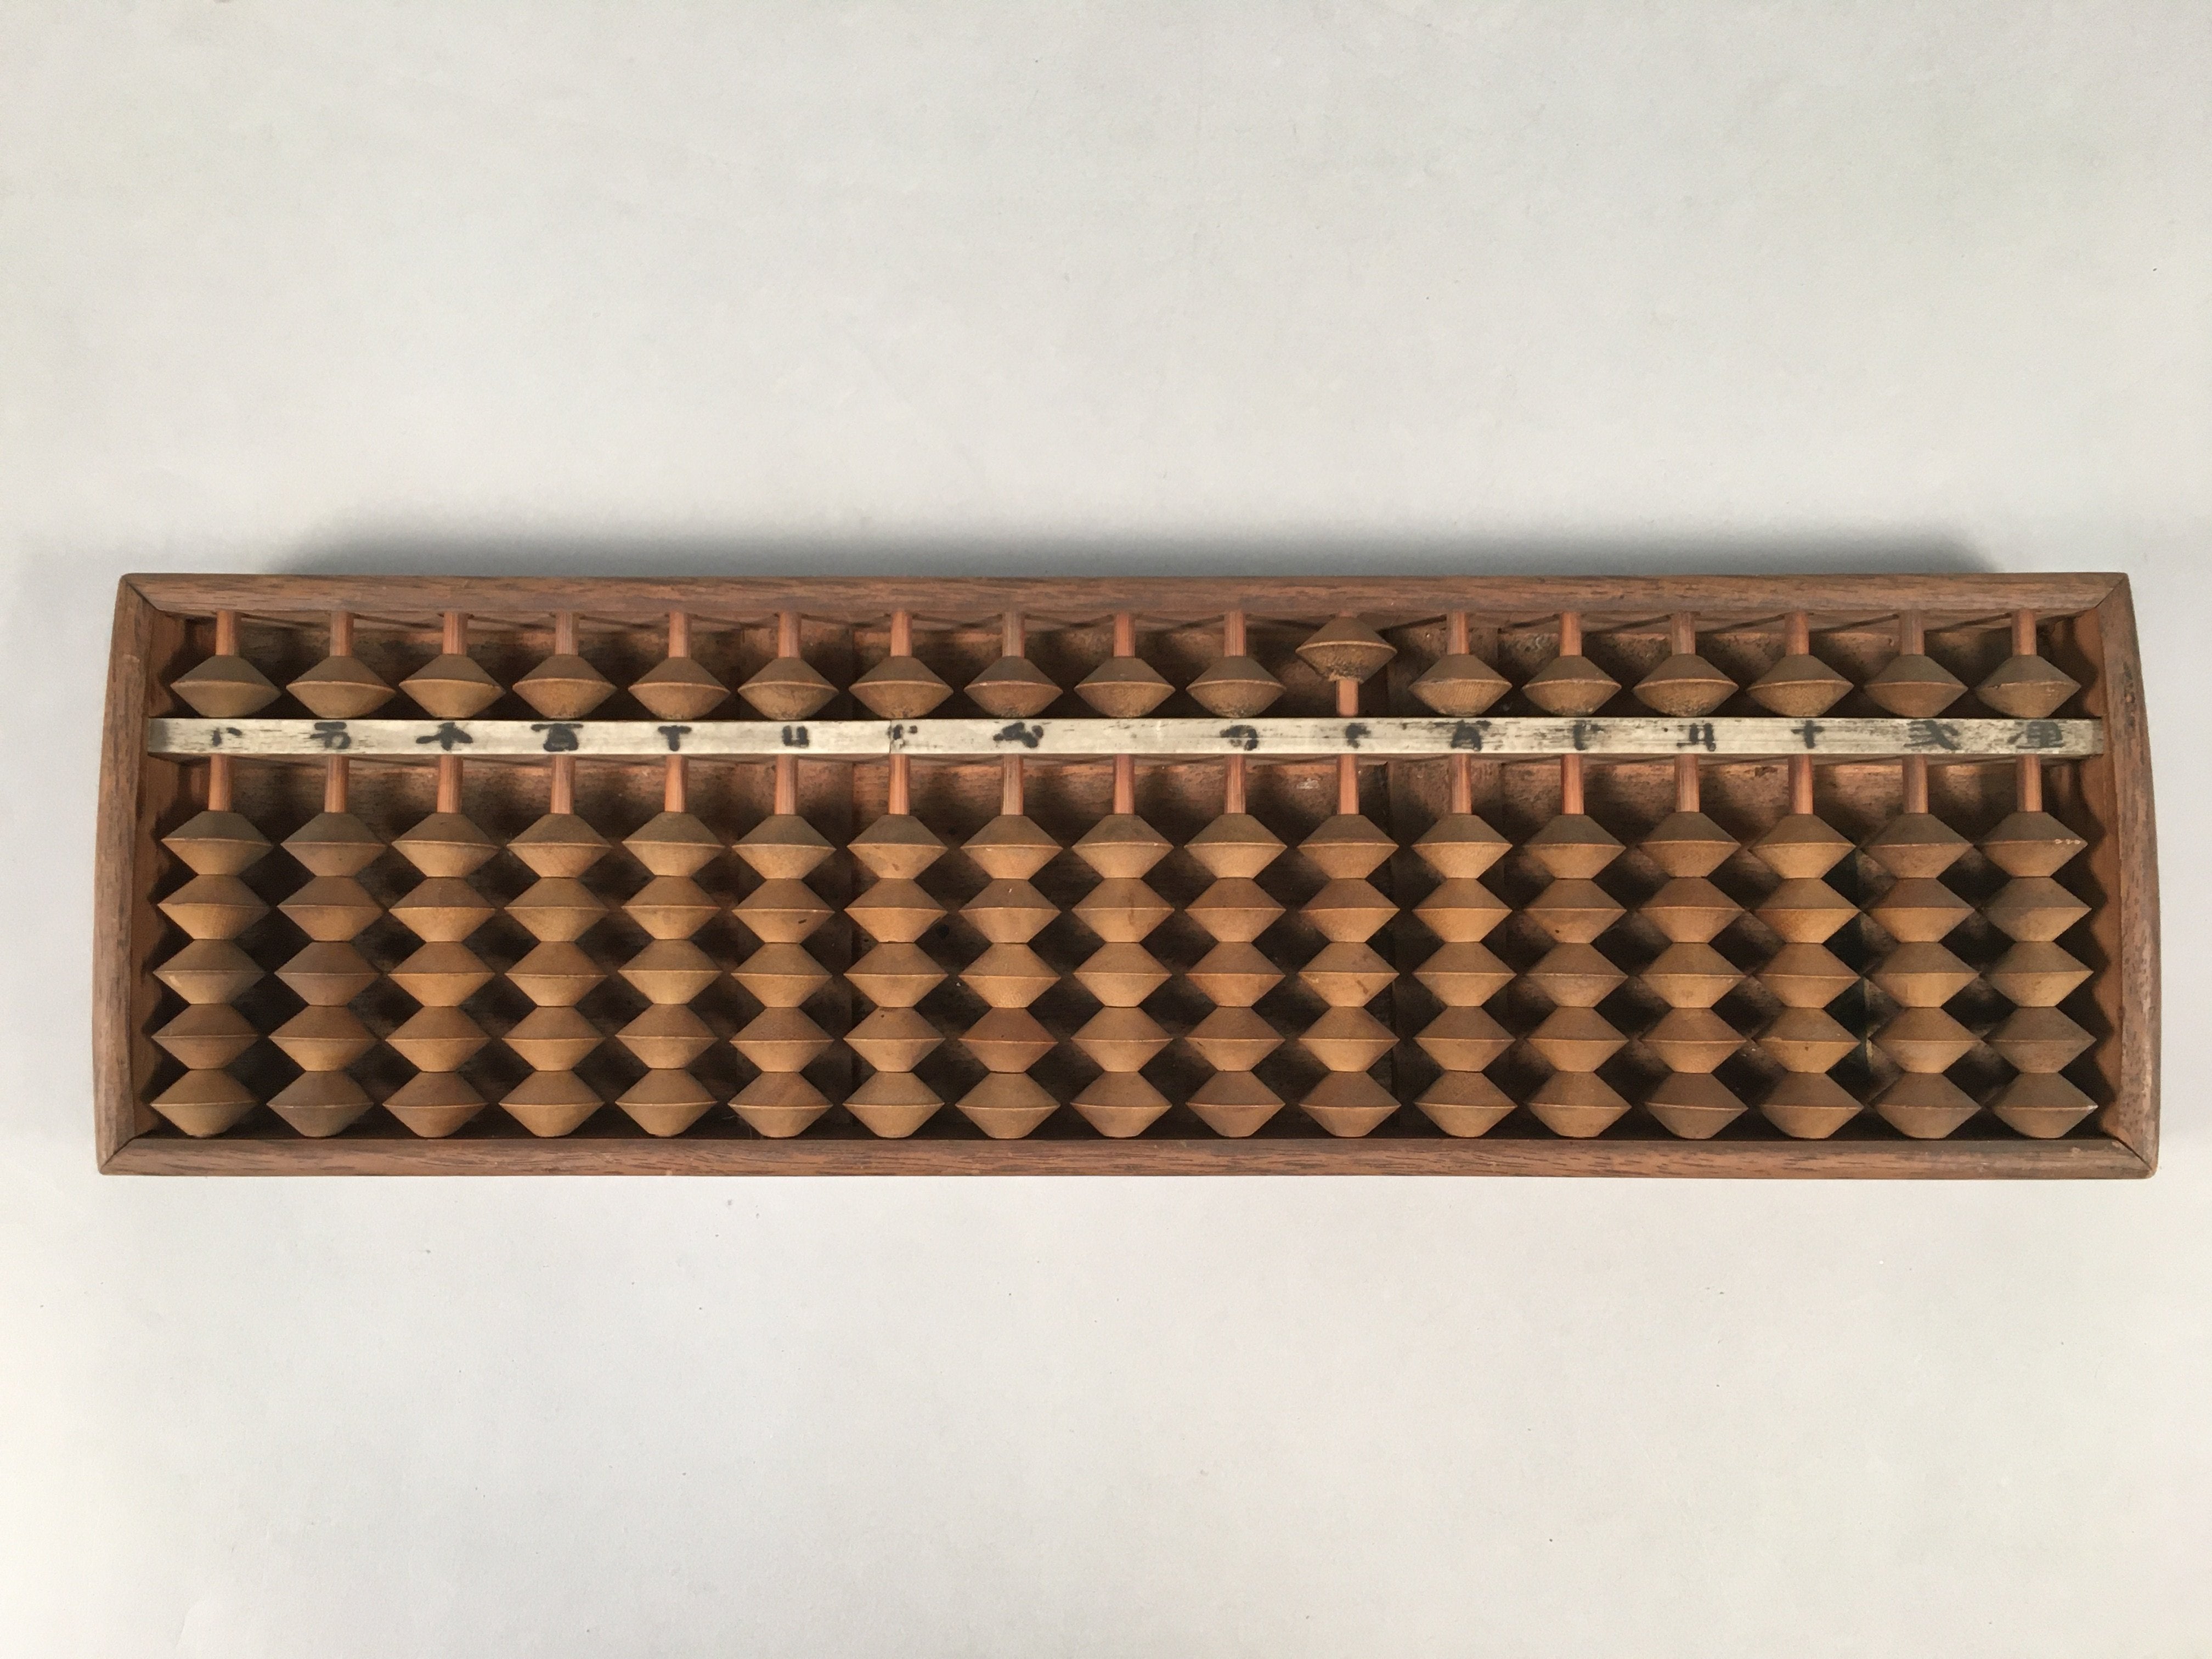 Japanese Wooden Abacus Calculating Tool 1/5 Beads 17 Rows Vtg Soroban ST47